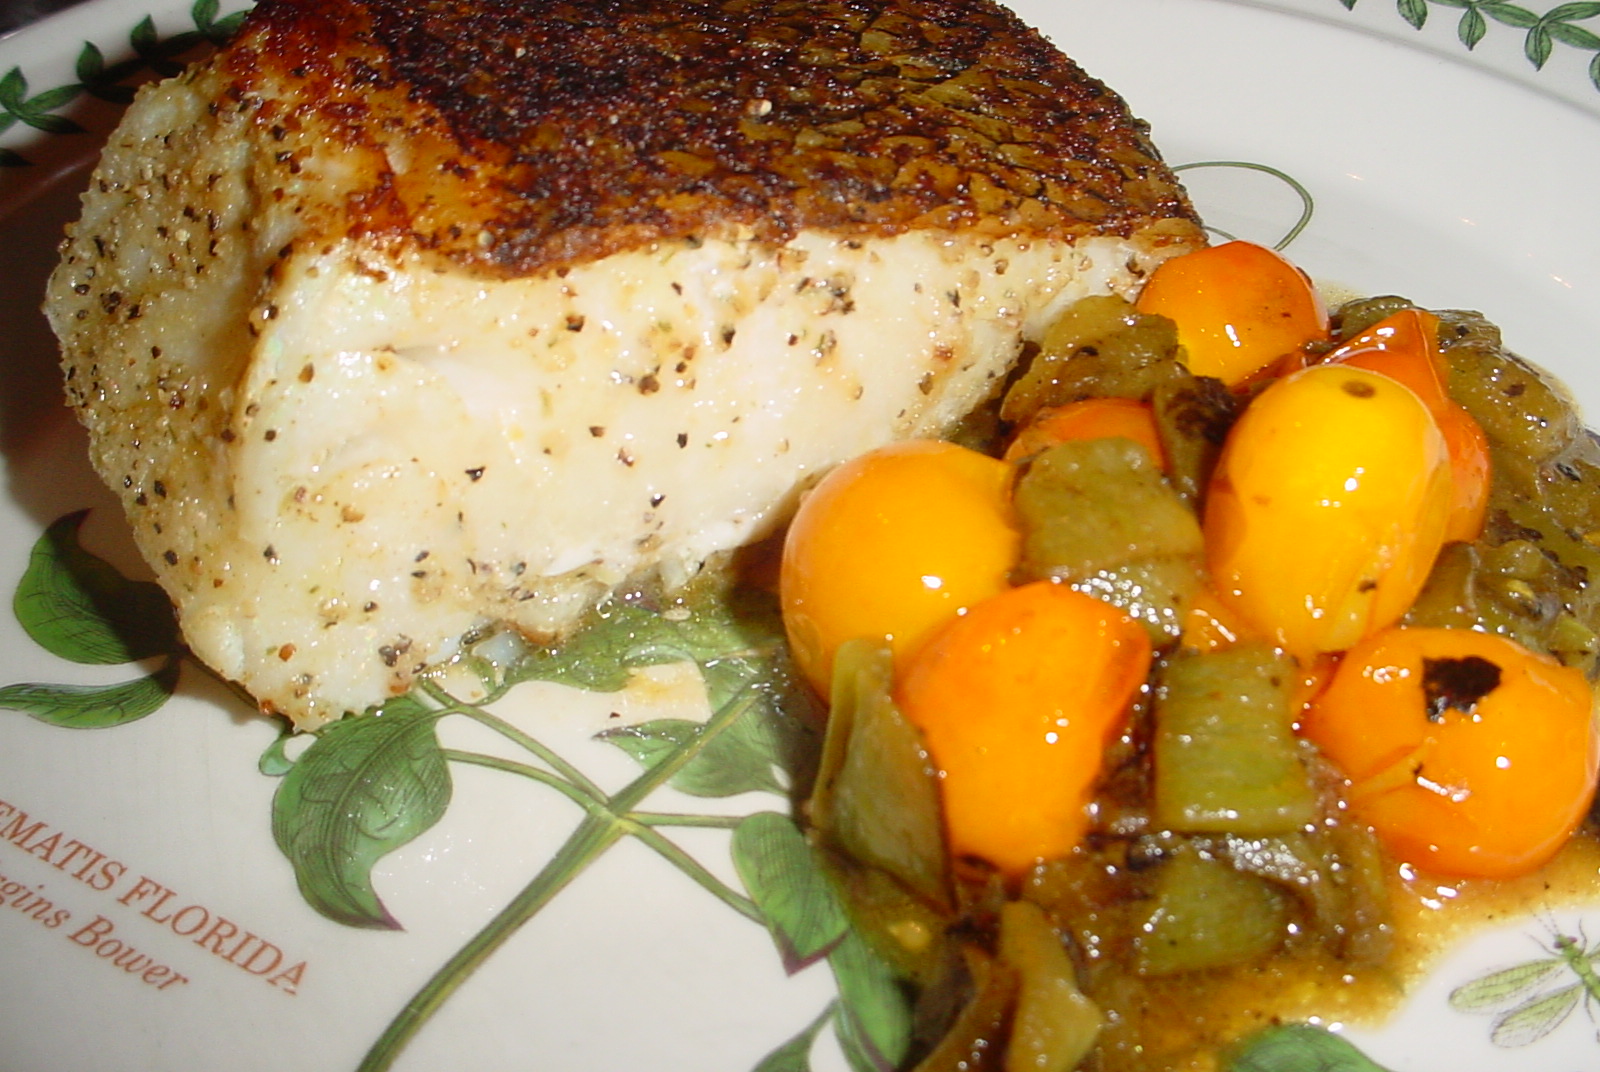 Kearby S Kitchen Chilean Sea Bass With Sauteed Cherry Tomatoes And